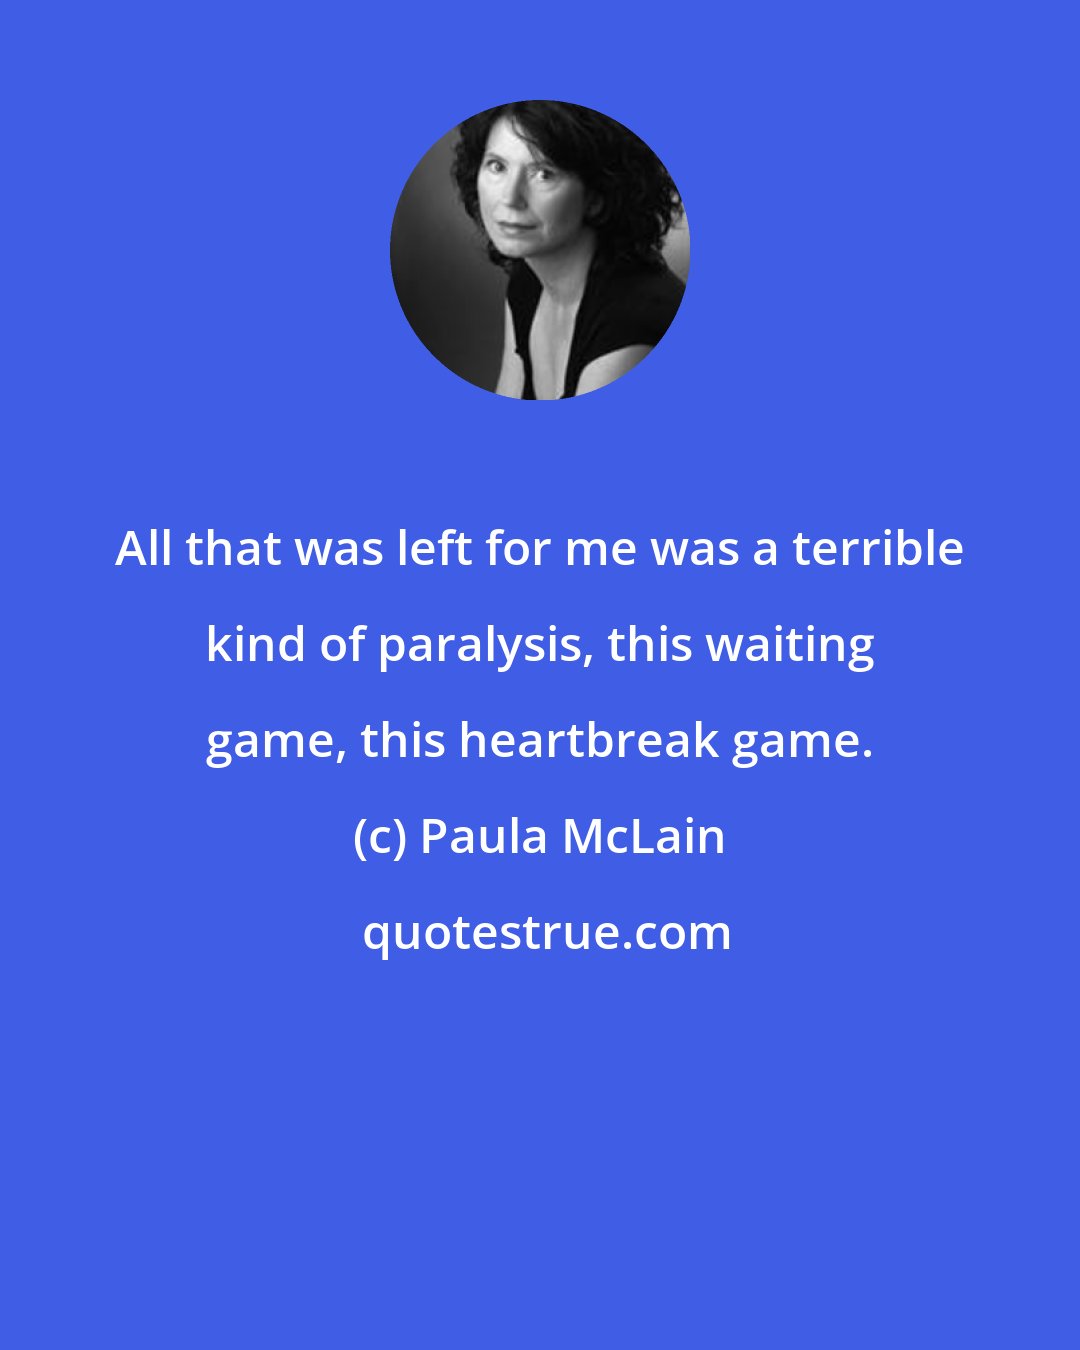 Paula McLain: All that was left for me was a terrible kind of paralysis, this waiting game, this heartbreak game.